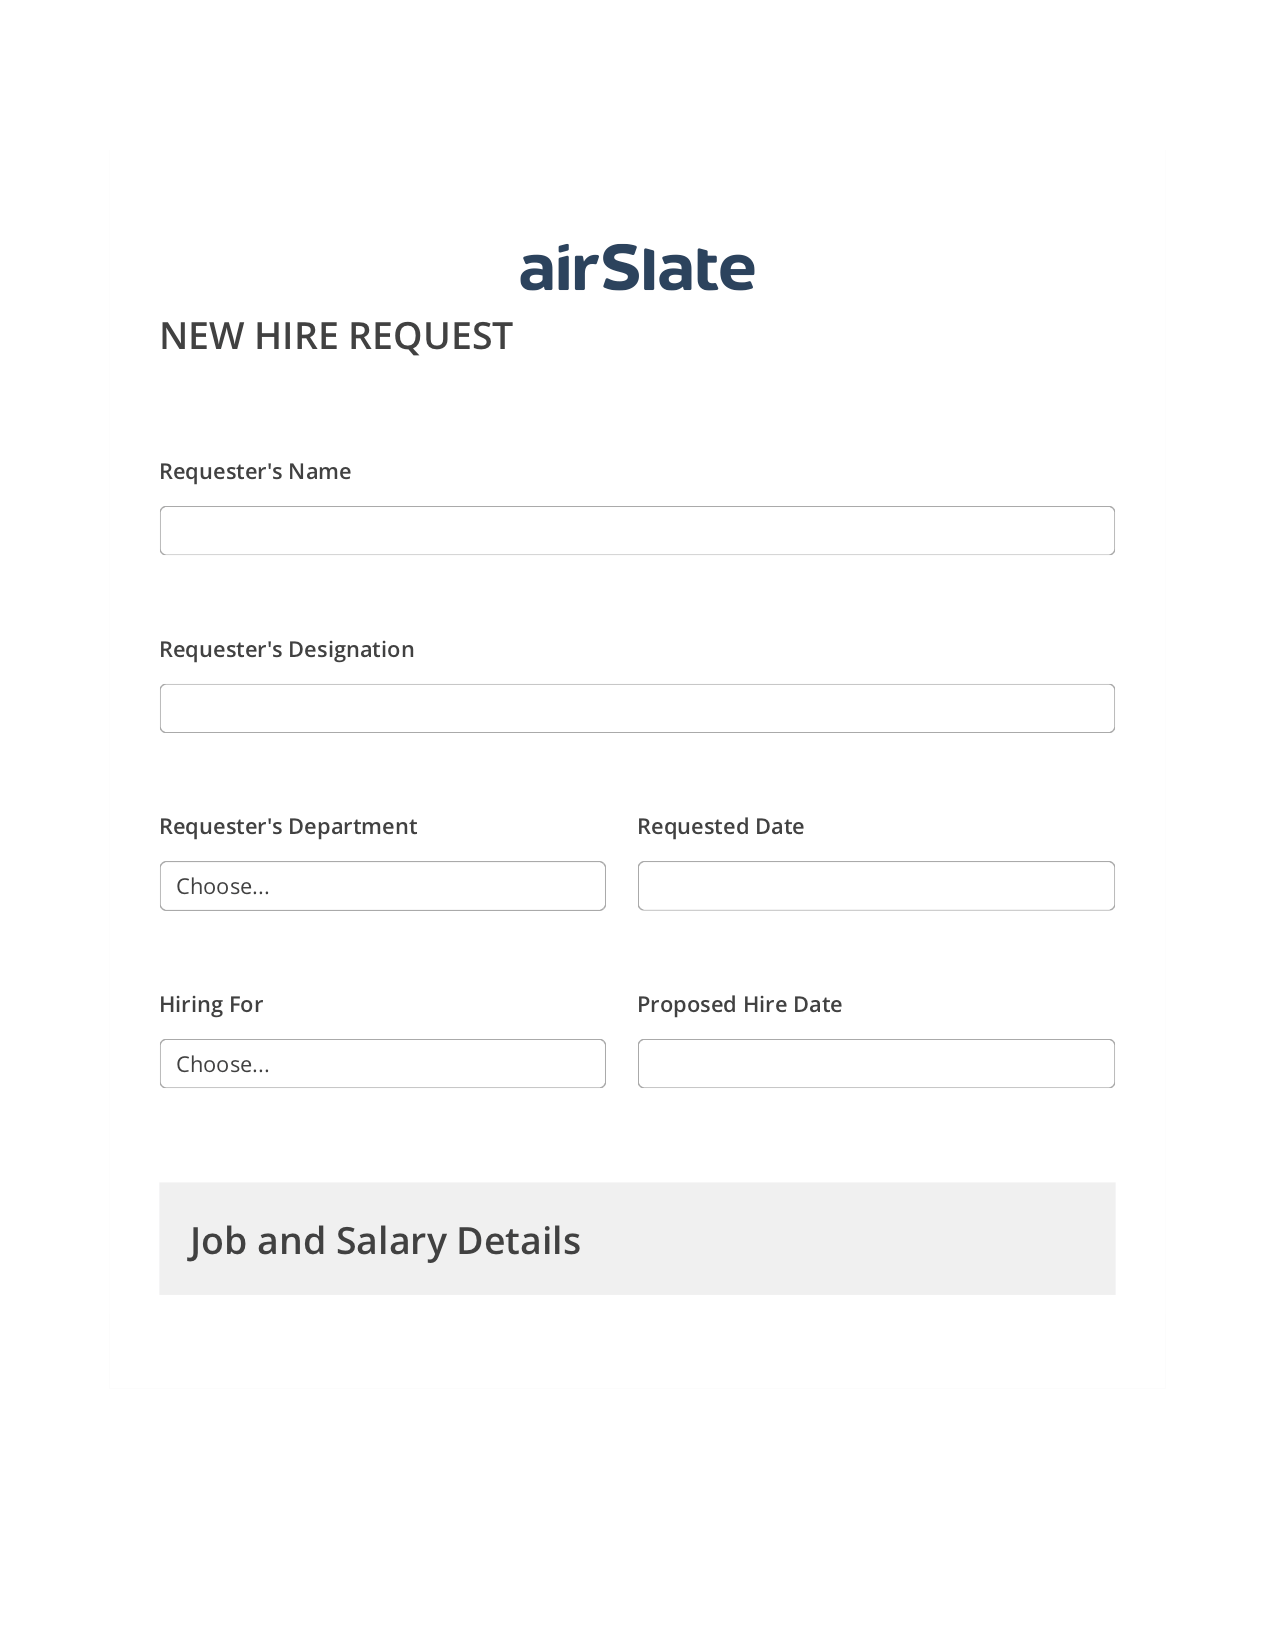 Hiring Request Workflow Pre-fill Dropdowns from CSV file Bot, Create Slate every Google Sheet Update Bot, Webhook Postfinish Bot